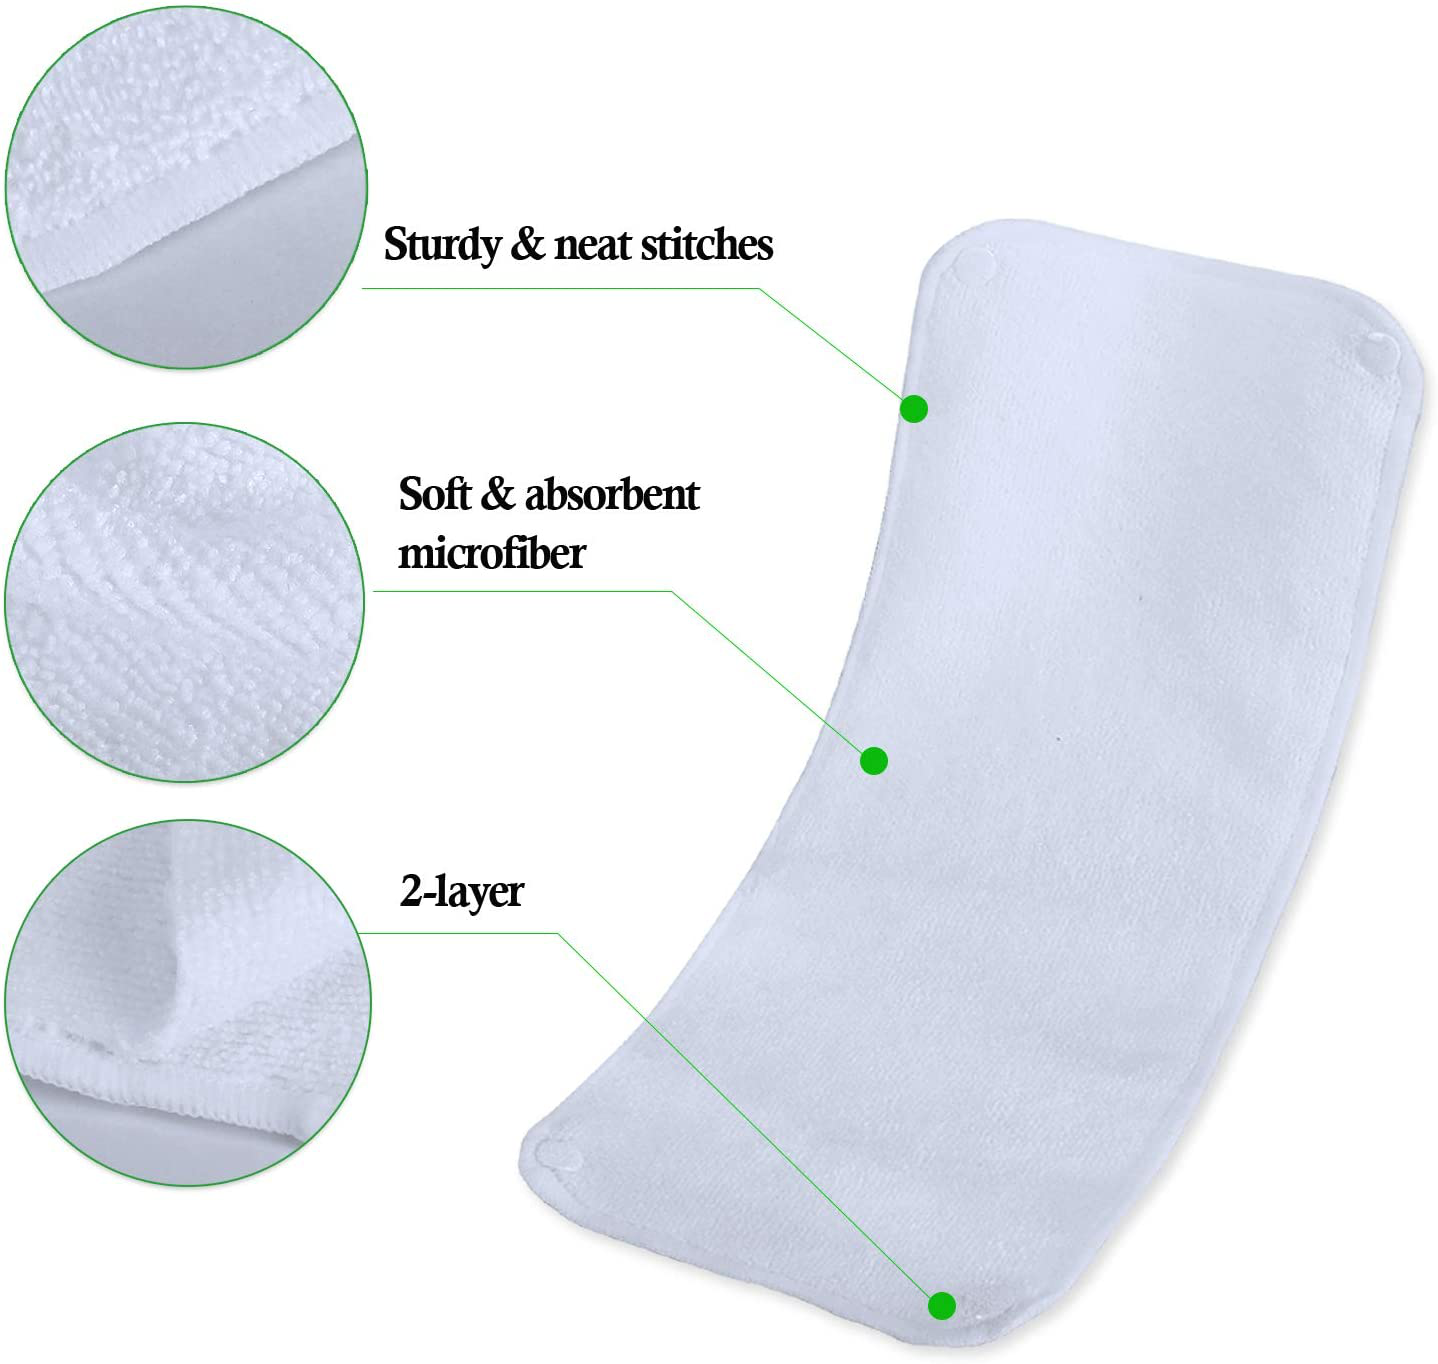 Teamoy Male Dog Diaper Pads, Reusable Dog Belly Band Liner Pads(Pack of 6)